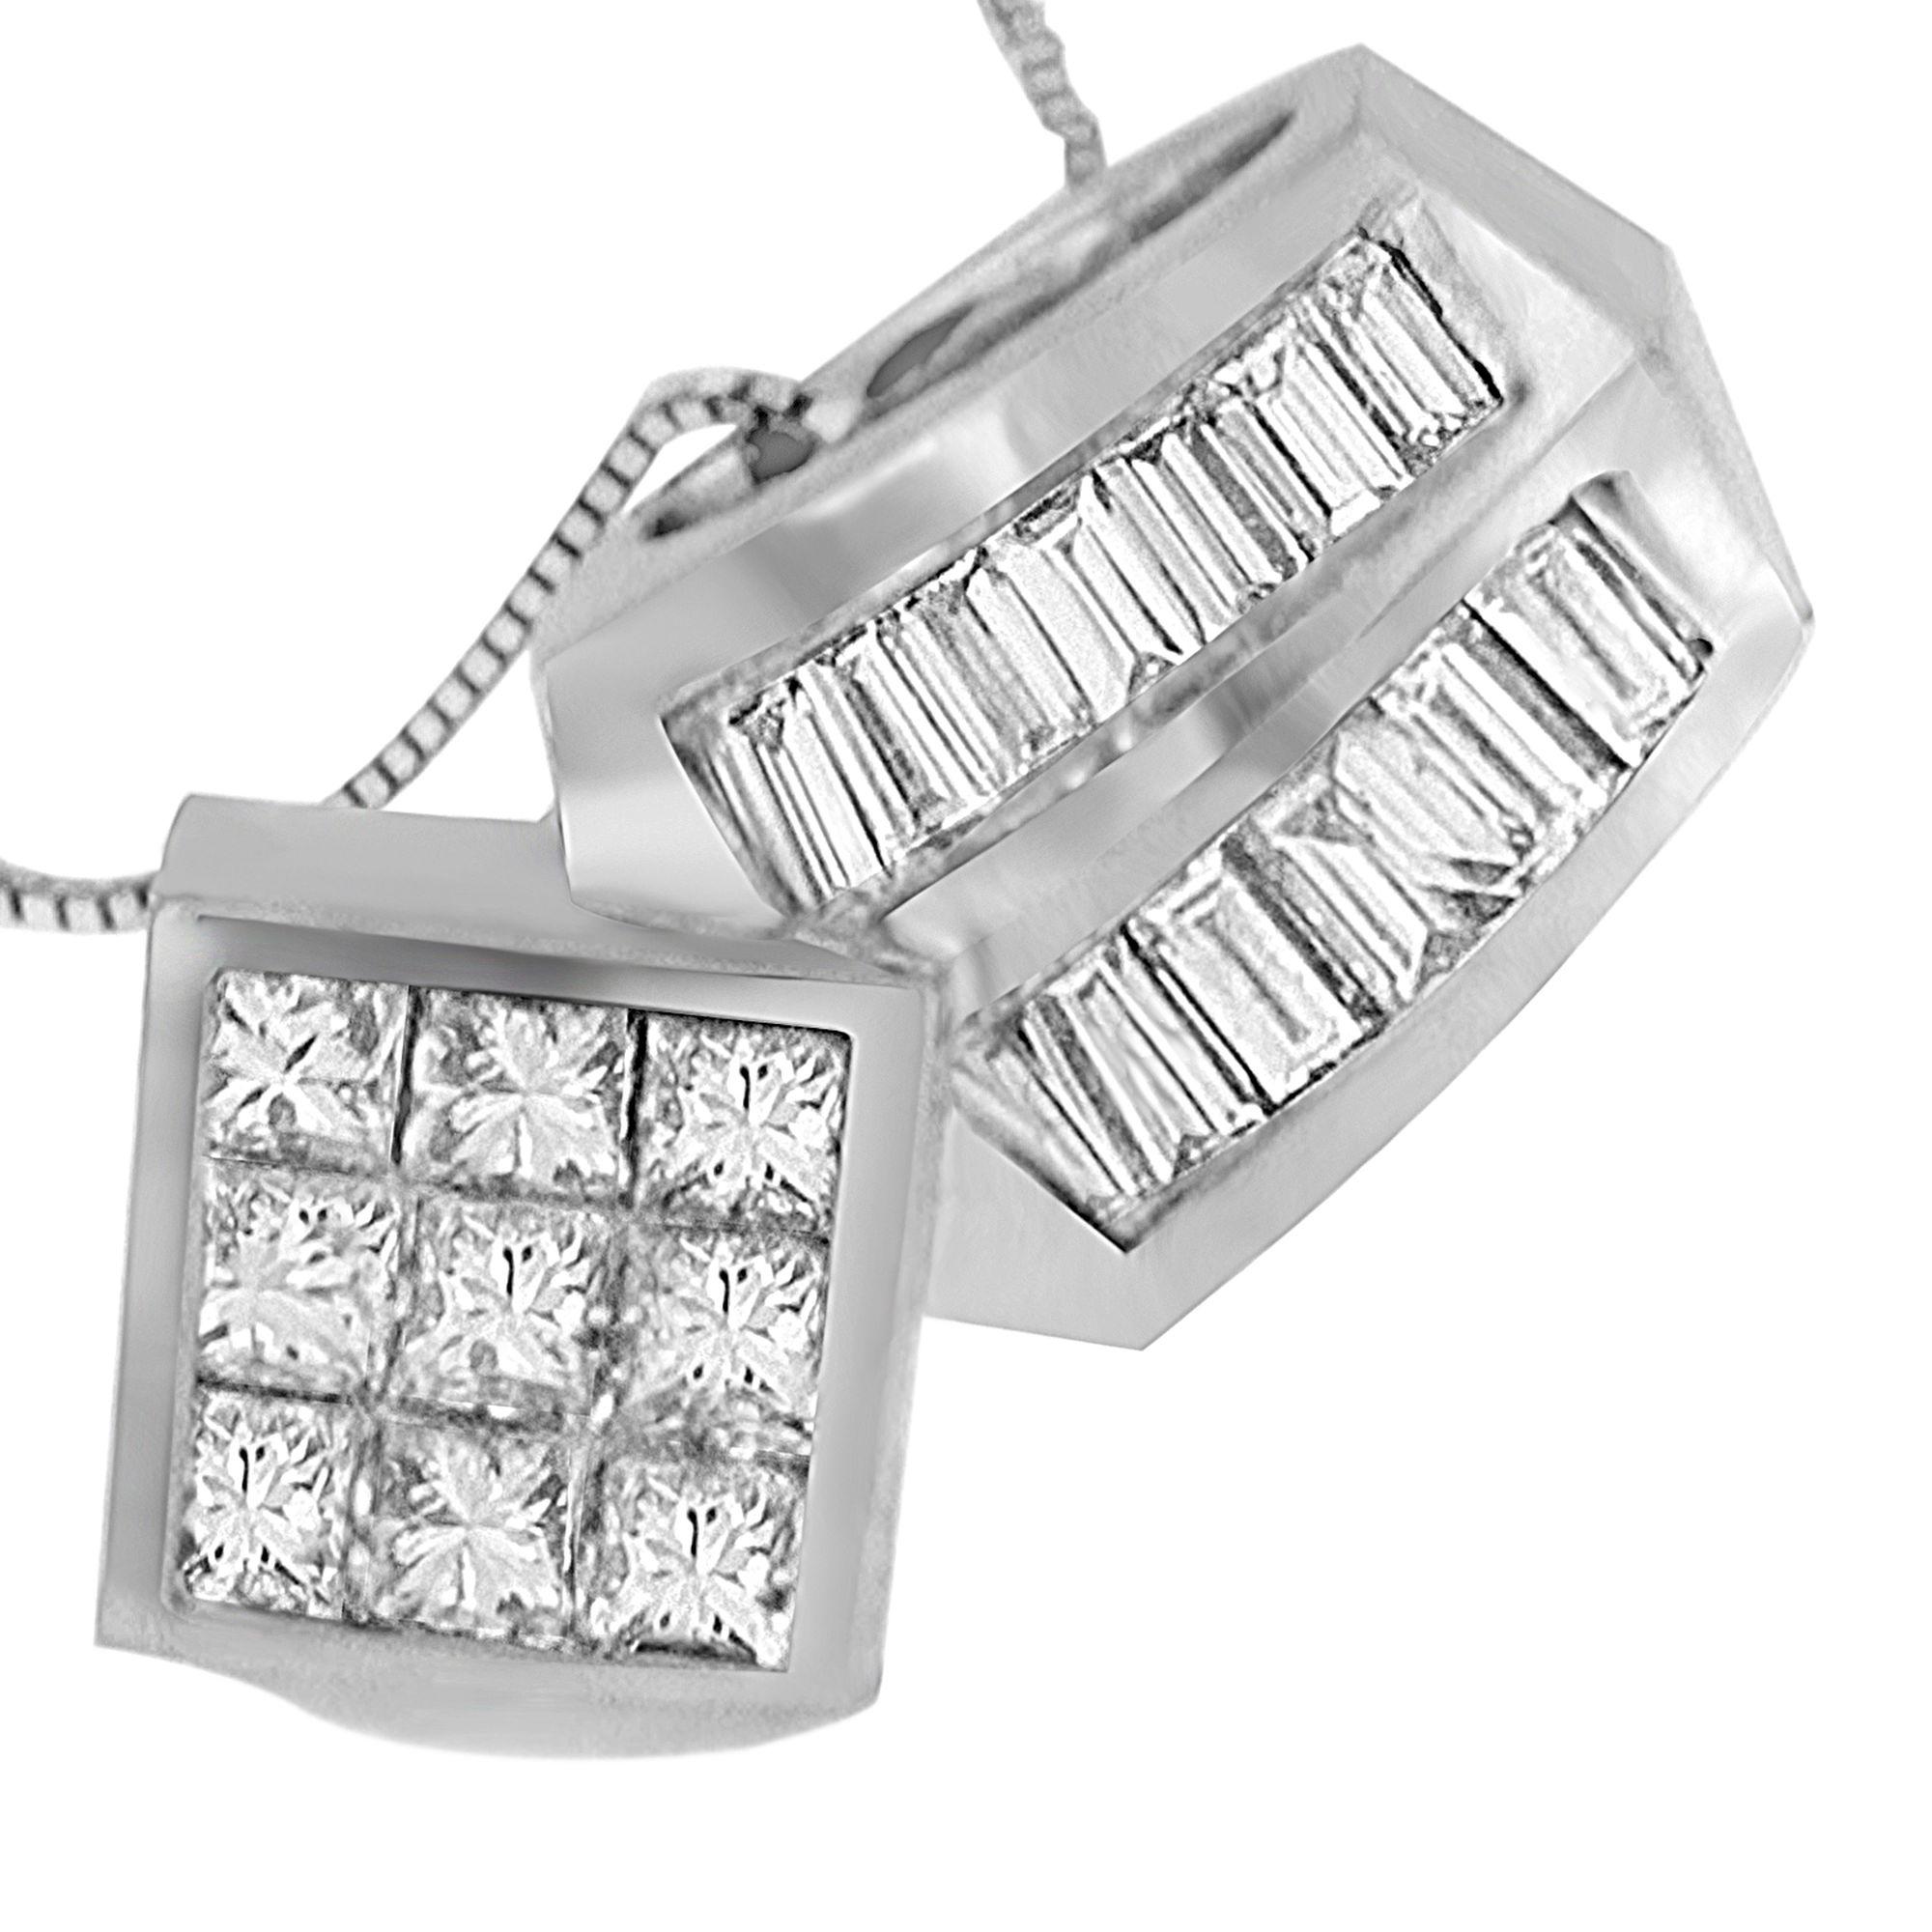 This flirty pendant features 3x3 square of princess cut diamonds suspended by two rows of channel-set baguettes. Framed in 14k white gold the unassuming simplicity of this pendant is betrayed by its quirky angles, mirrored in diamonds.

Product